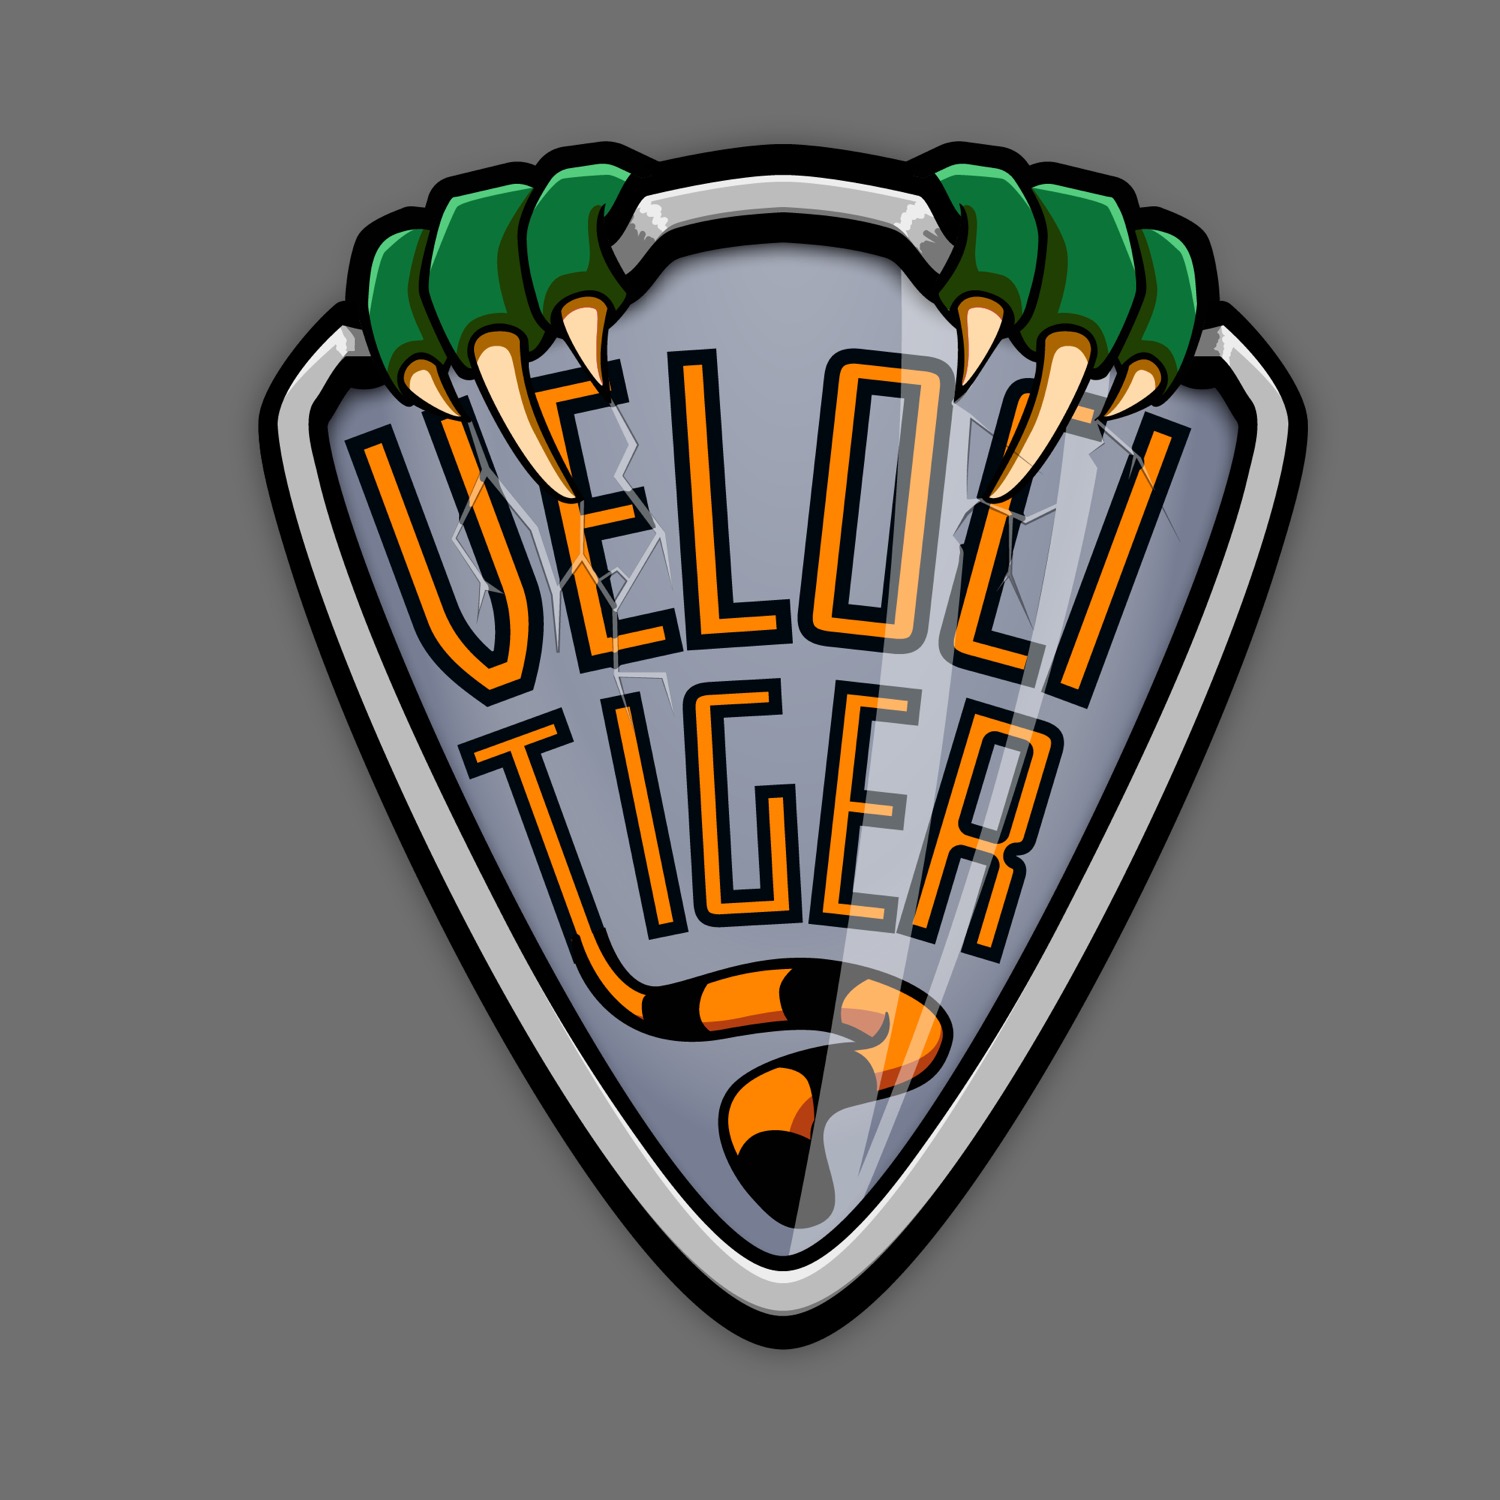 The Velocitiger Shield, showing the band's name with a tiger's tail at the bottom and two velociraptor claws gripping the upper edge